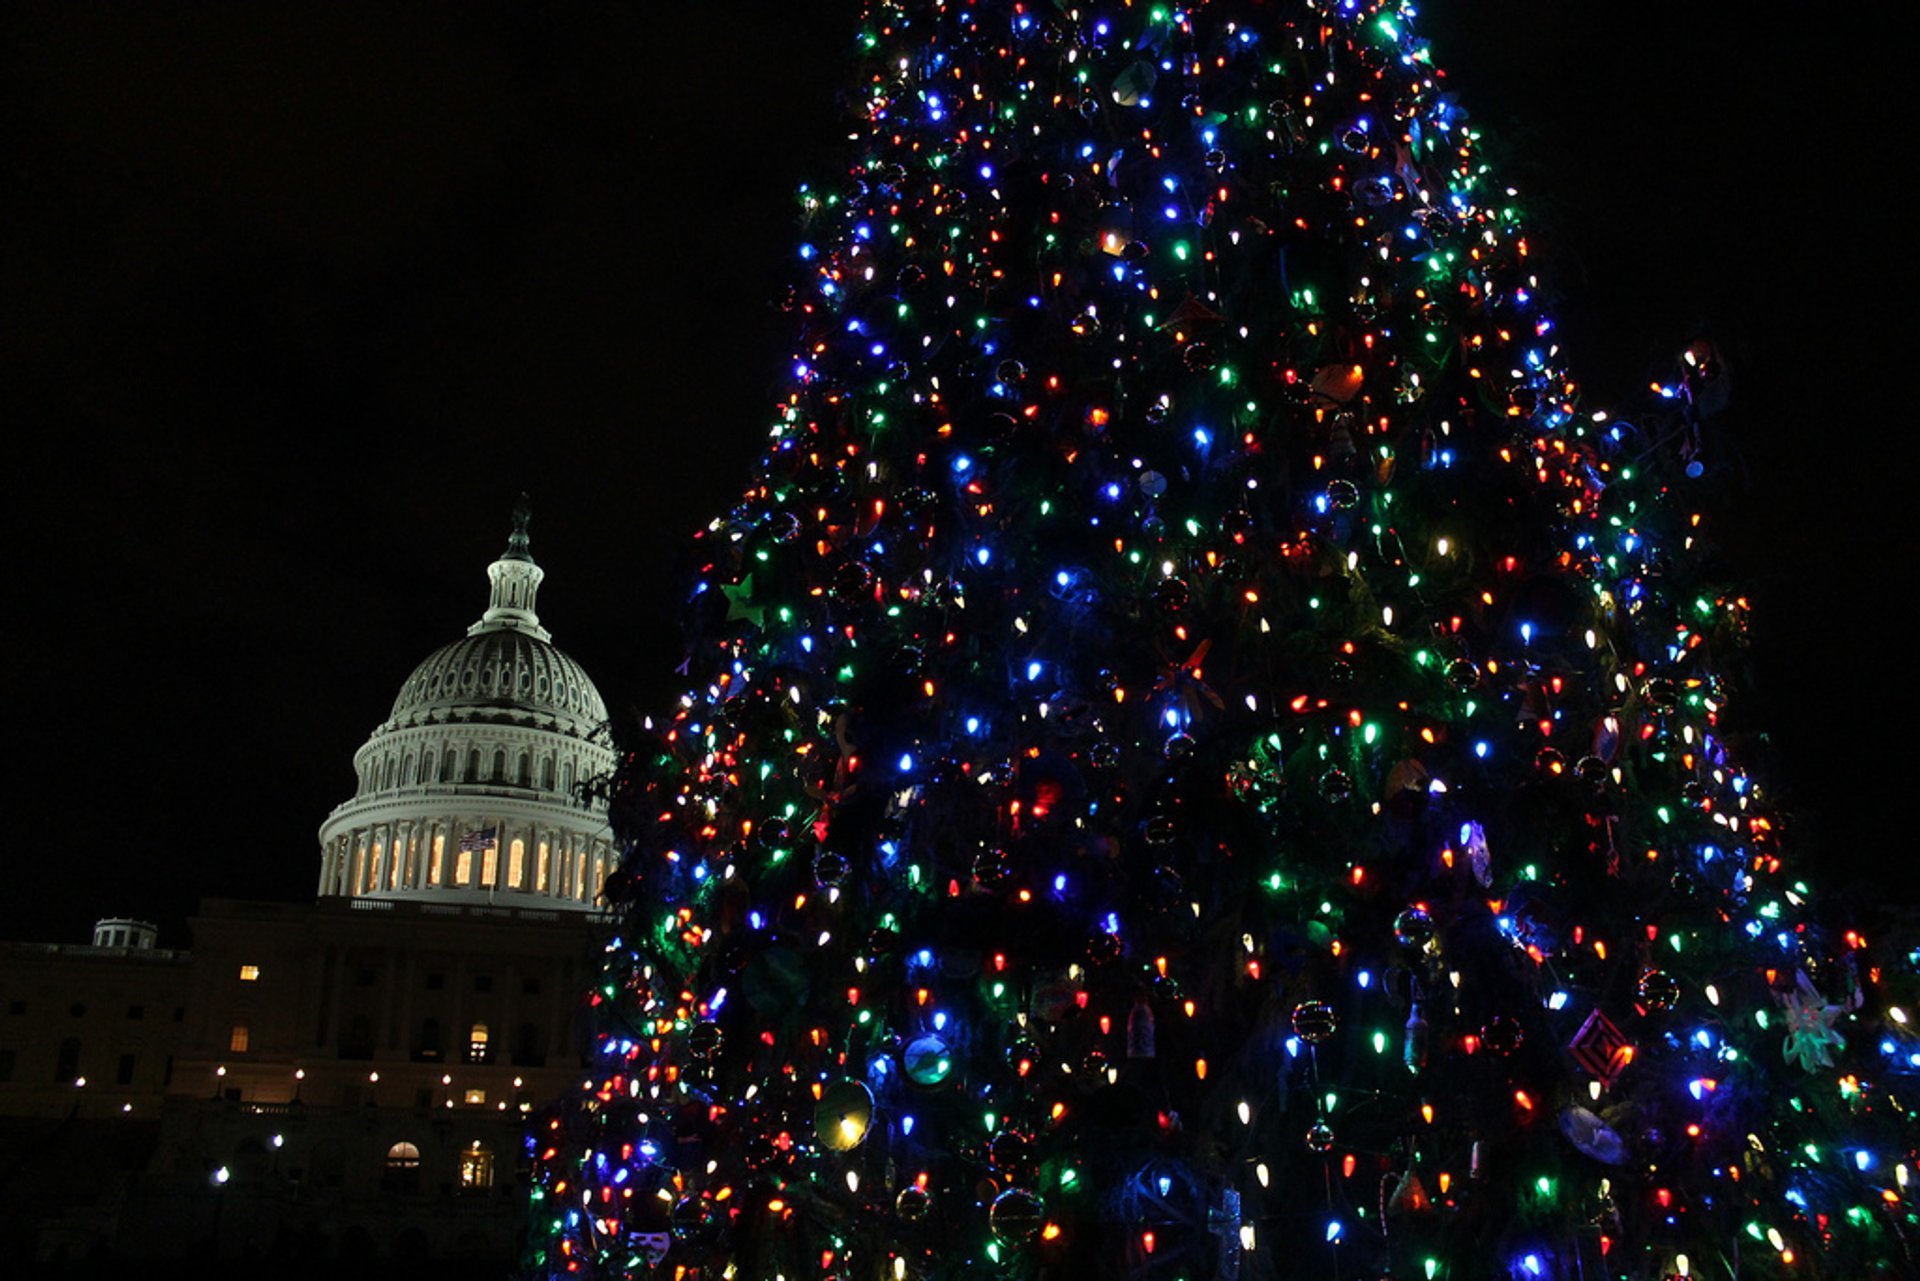 Christmas Events Dc 2021